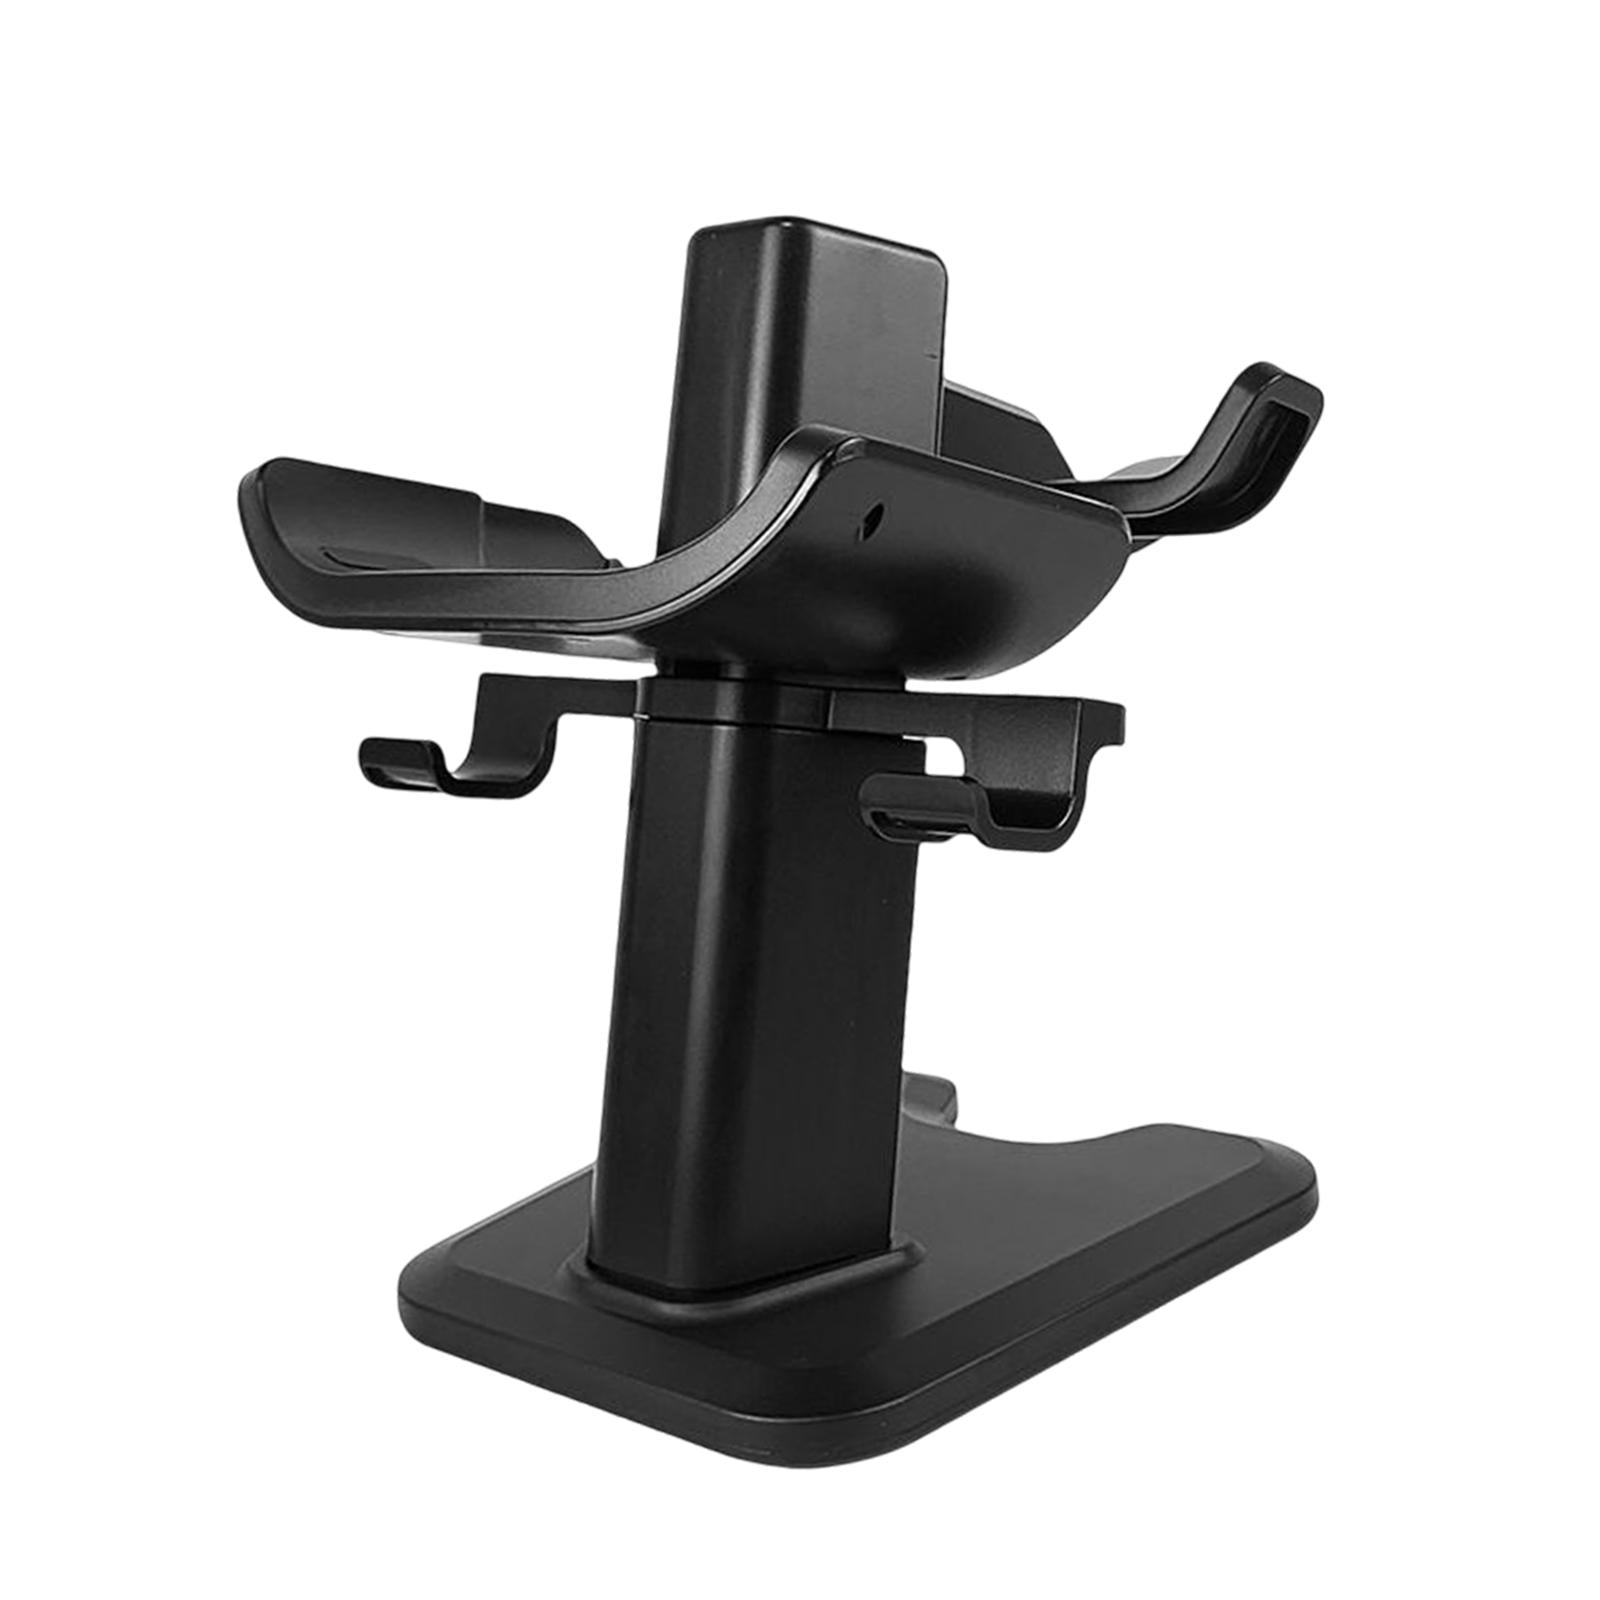 VR Stand Protection Controller Mount Station Storage Stand Stable for Quest2 Black